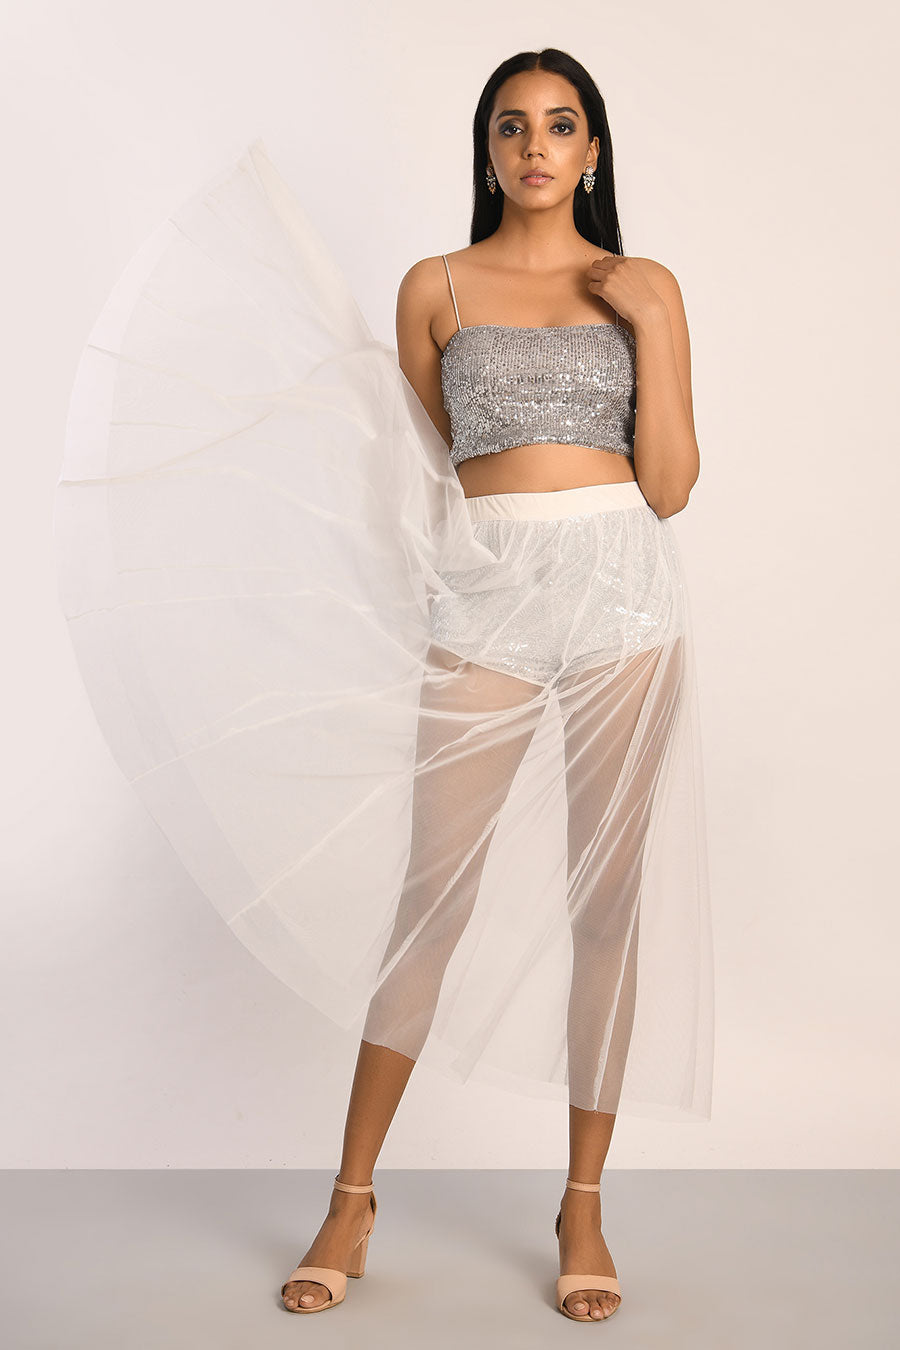 Silver Sequined Shorts With White Tulle Skirt